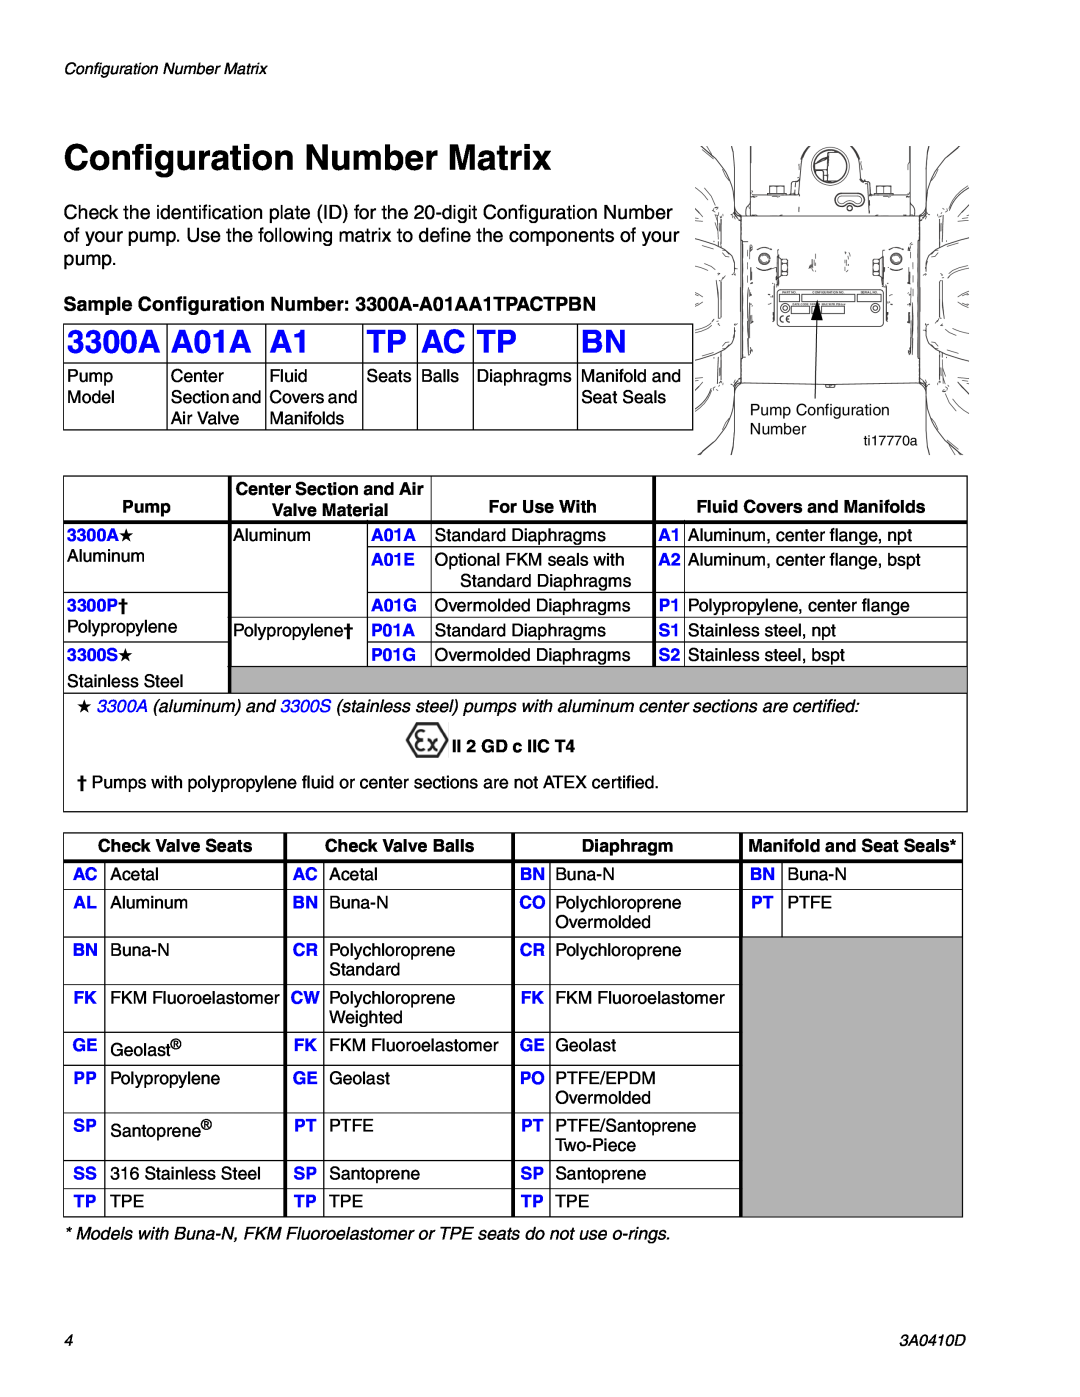 Graco 3A0410D important safety instructions Configuration Number Matrix, Sample Configuration Number 3300A-A01AA1TPACTPBN 